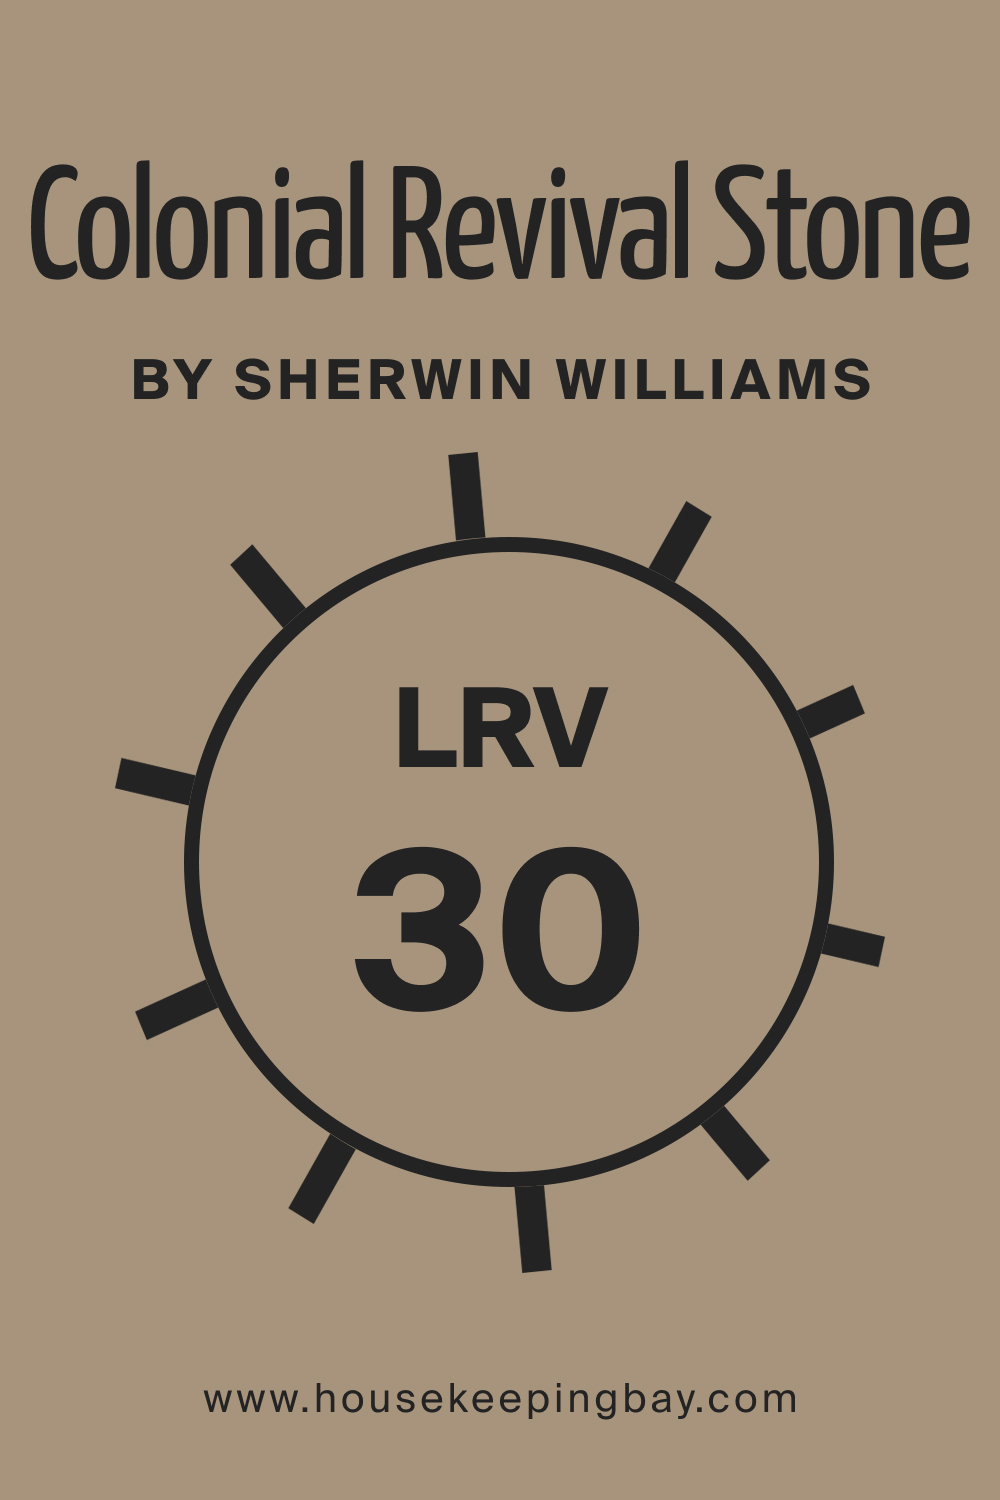 SW 2827 Colonial Revival Stone by Sherwin Williams. LRV 30